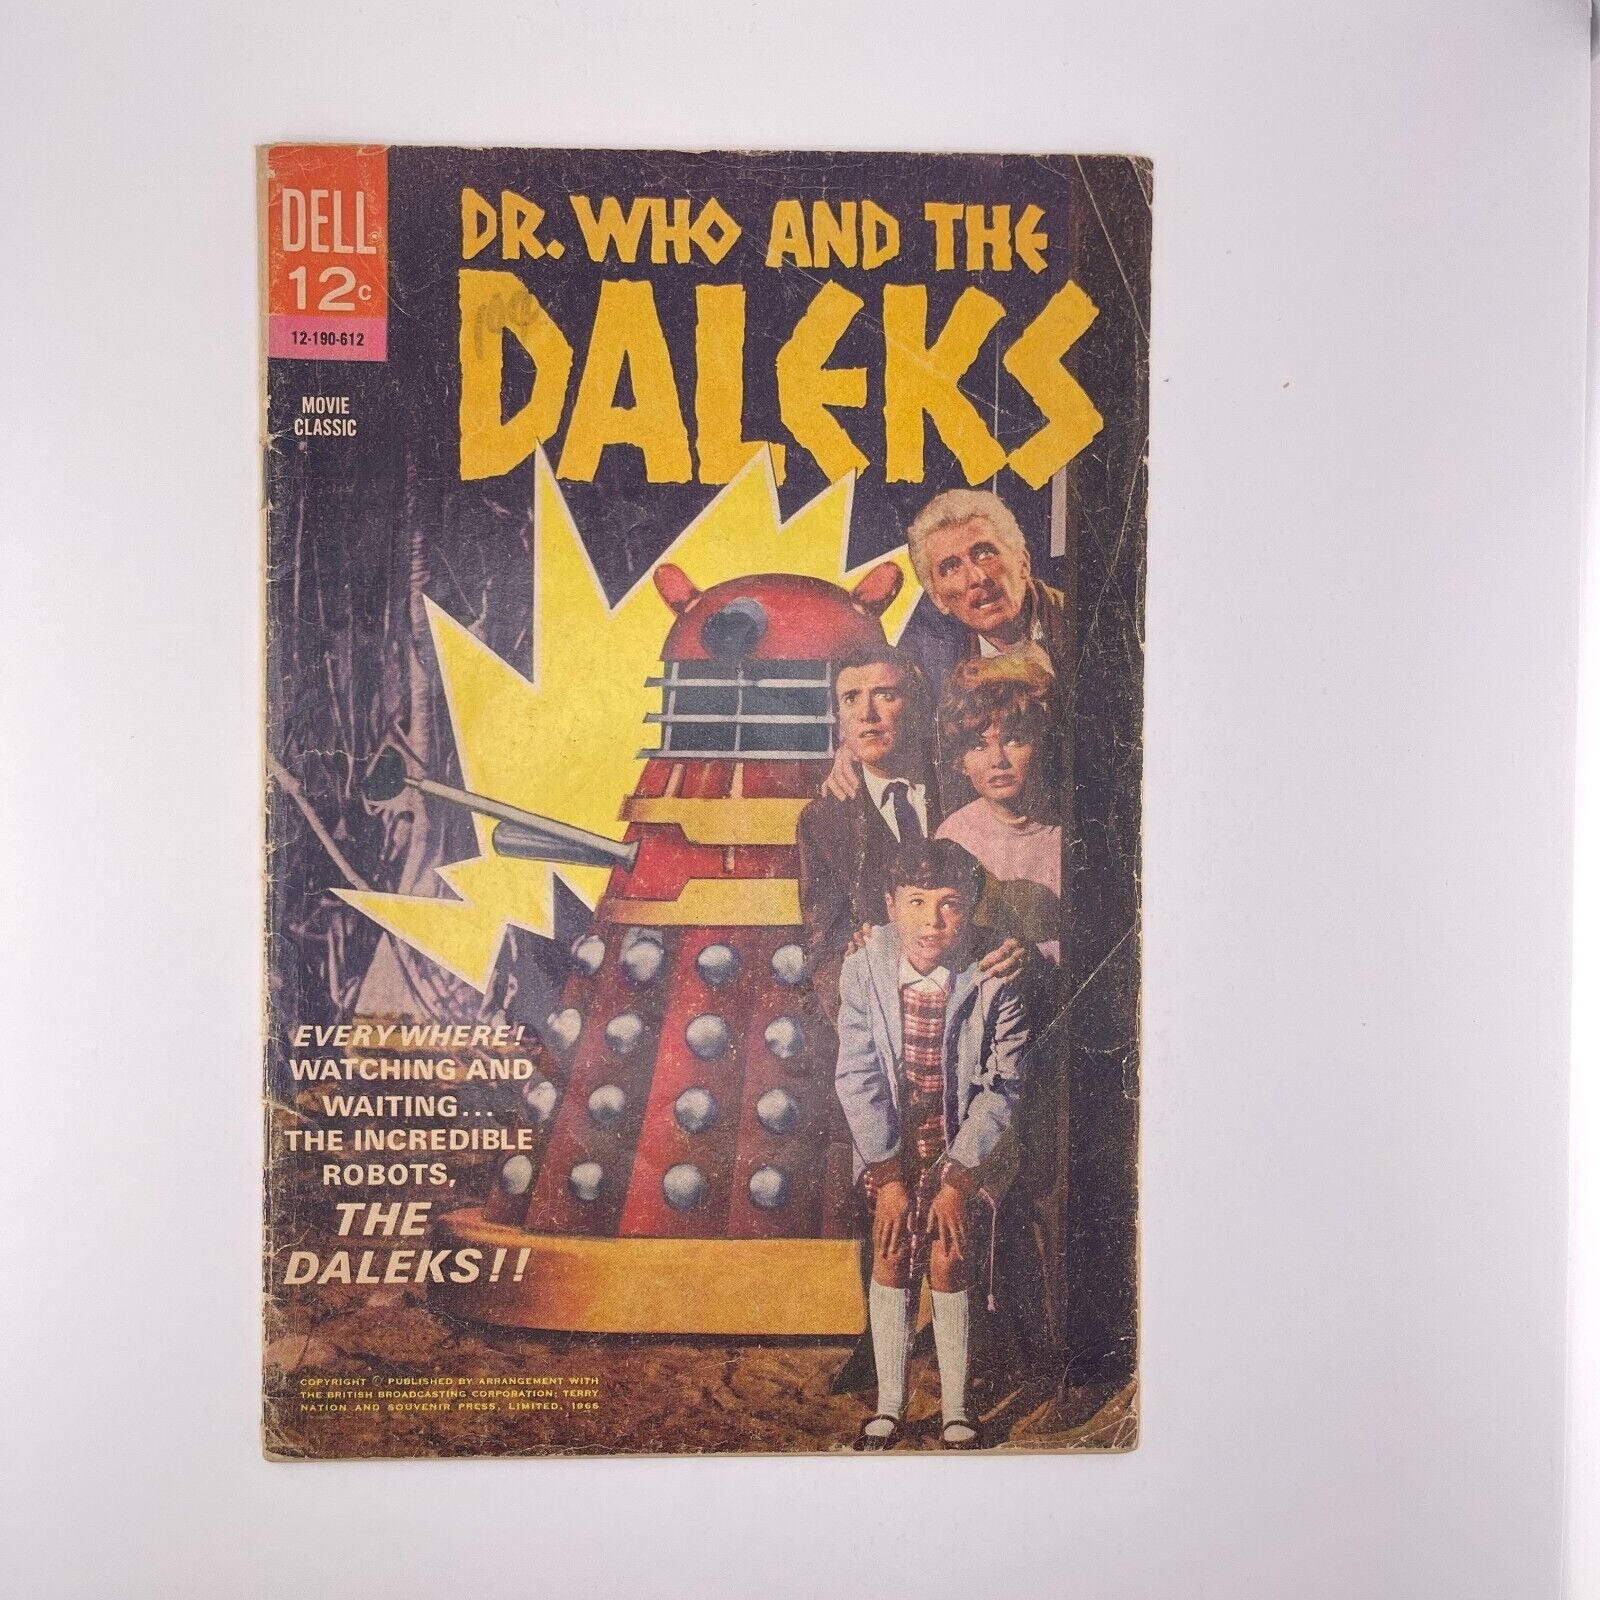 Doctor Who and the Daleks #612 - 1st app. Dr. Who in US Market (Dell, 1966)